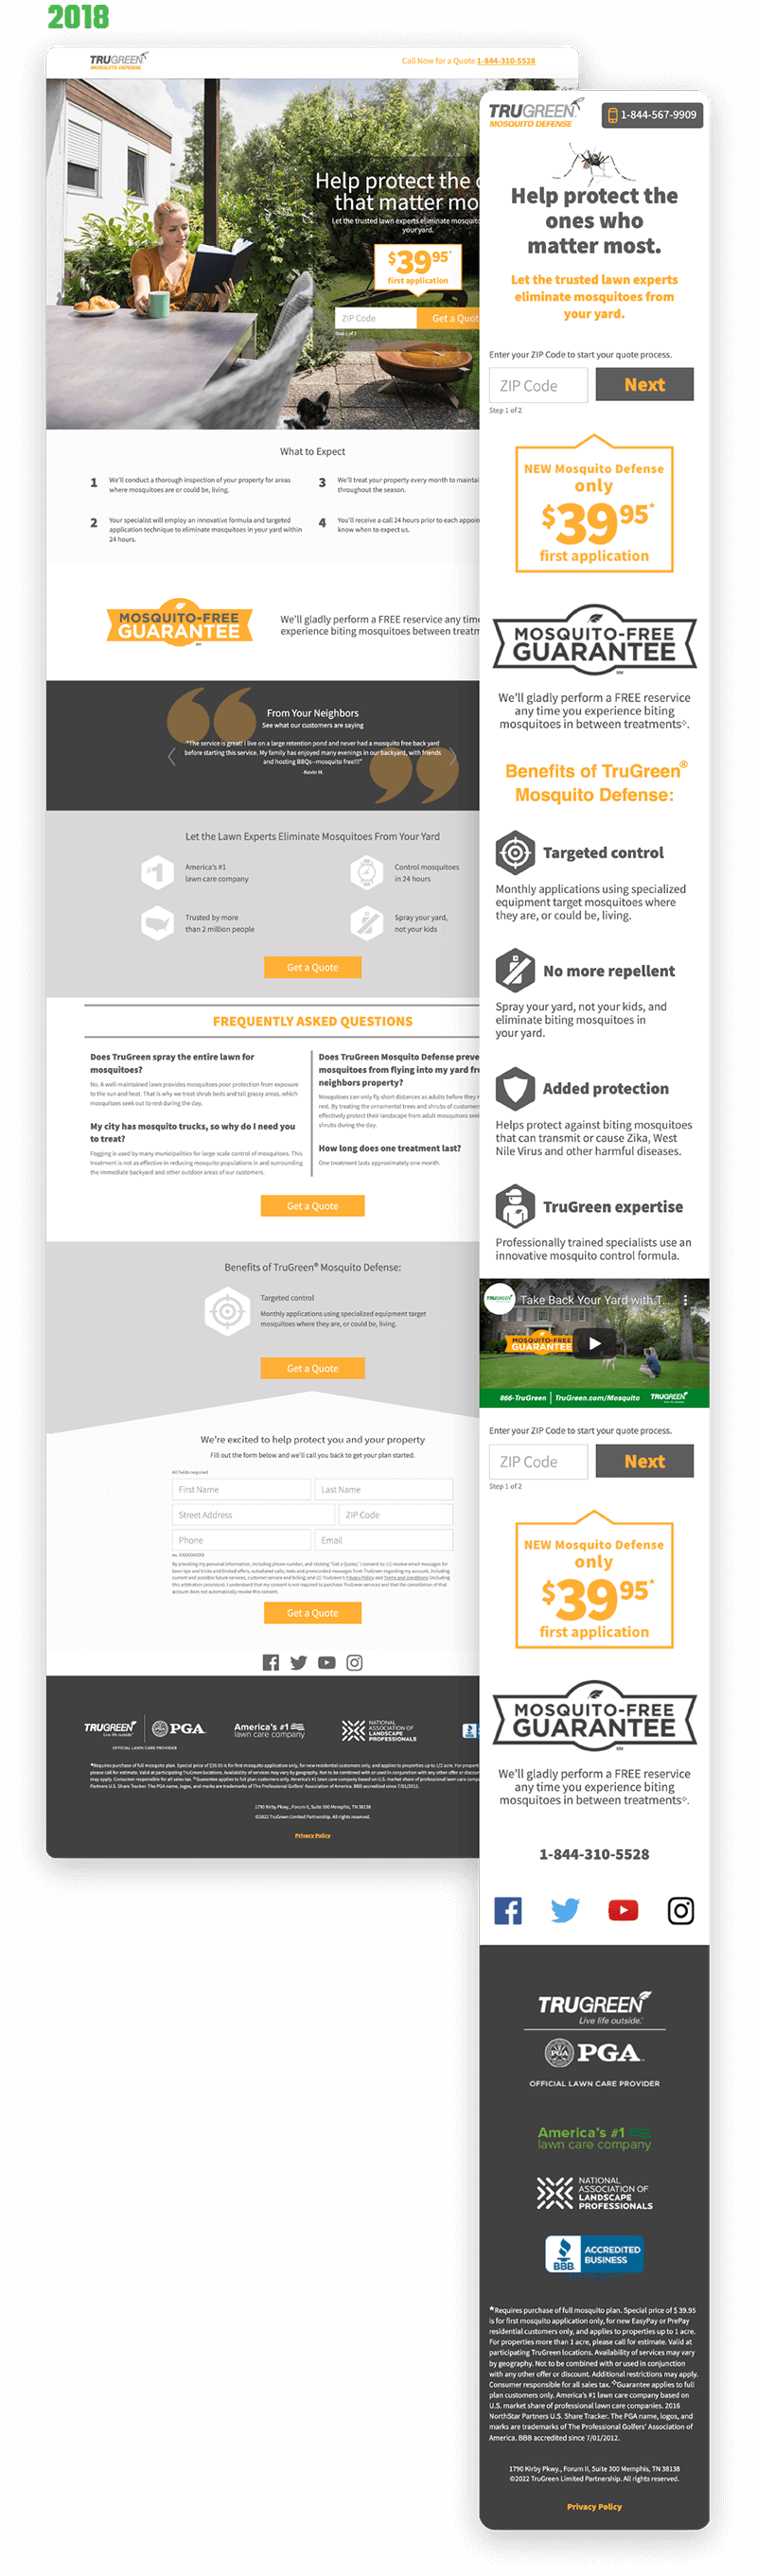 Mosquito product landing page from 2018